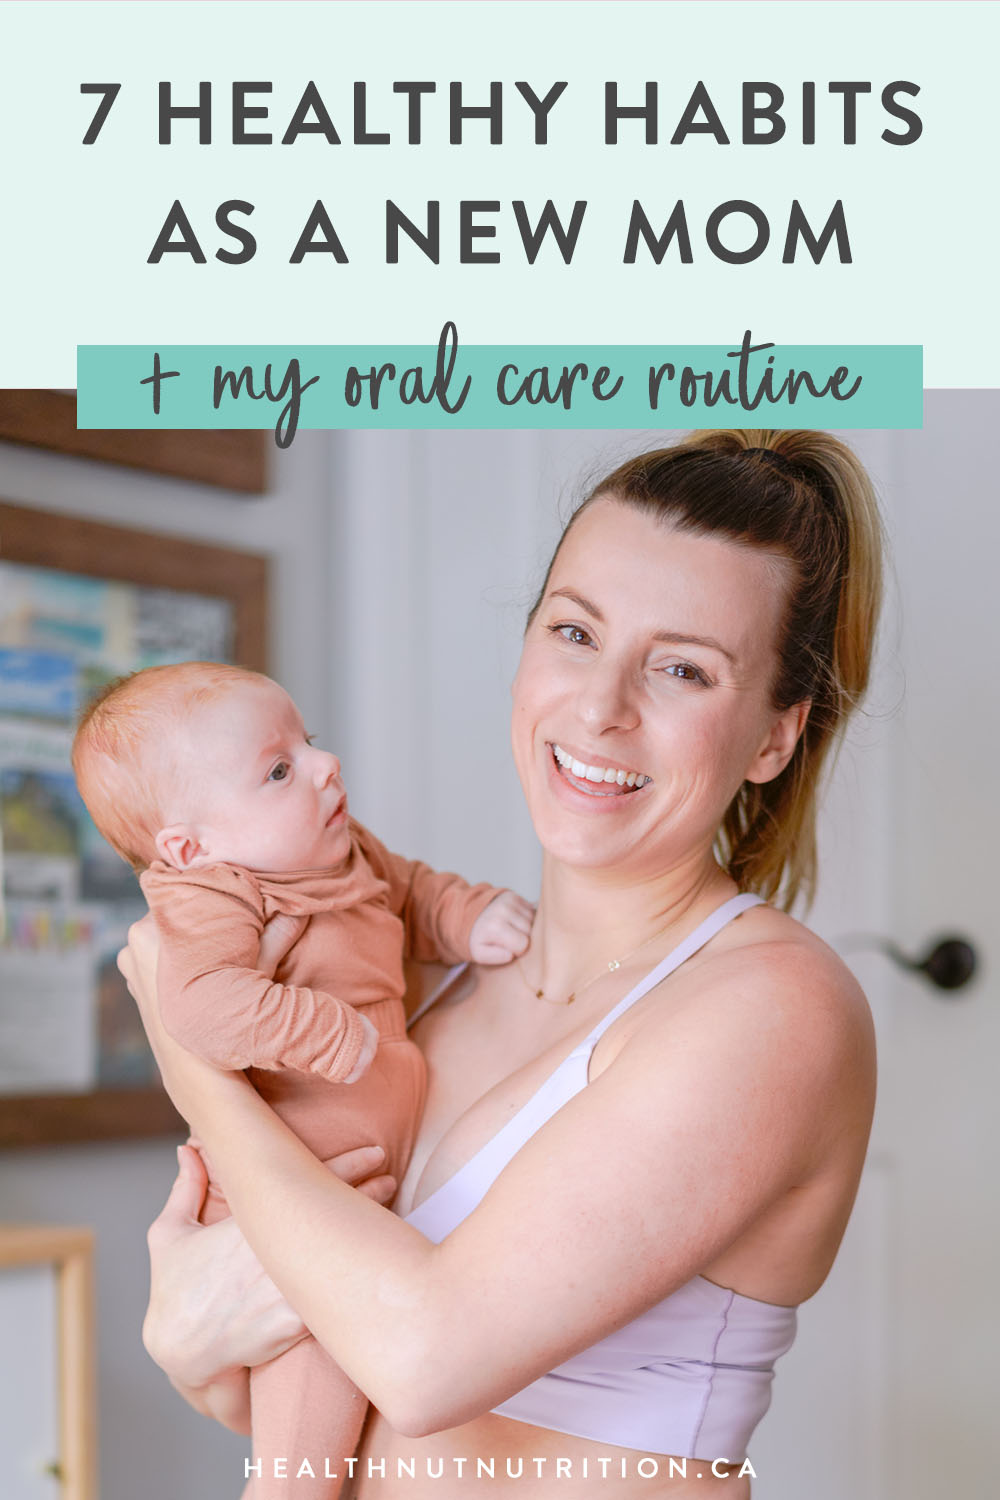 7 Must Know Healthy Habits that help me feel calm, grounded, and ready to take on another day of motherhood! These 7 Must Know Healthy Habits have changed my life and allowed me to be more productive, while also honouring my body and self-care needs.